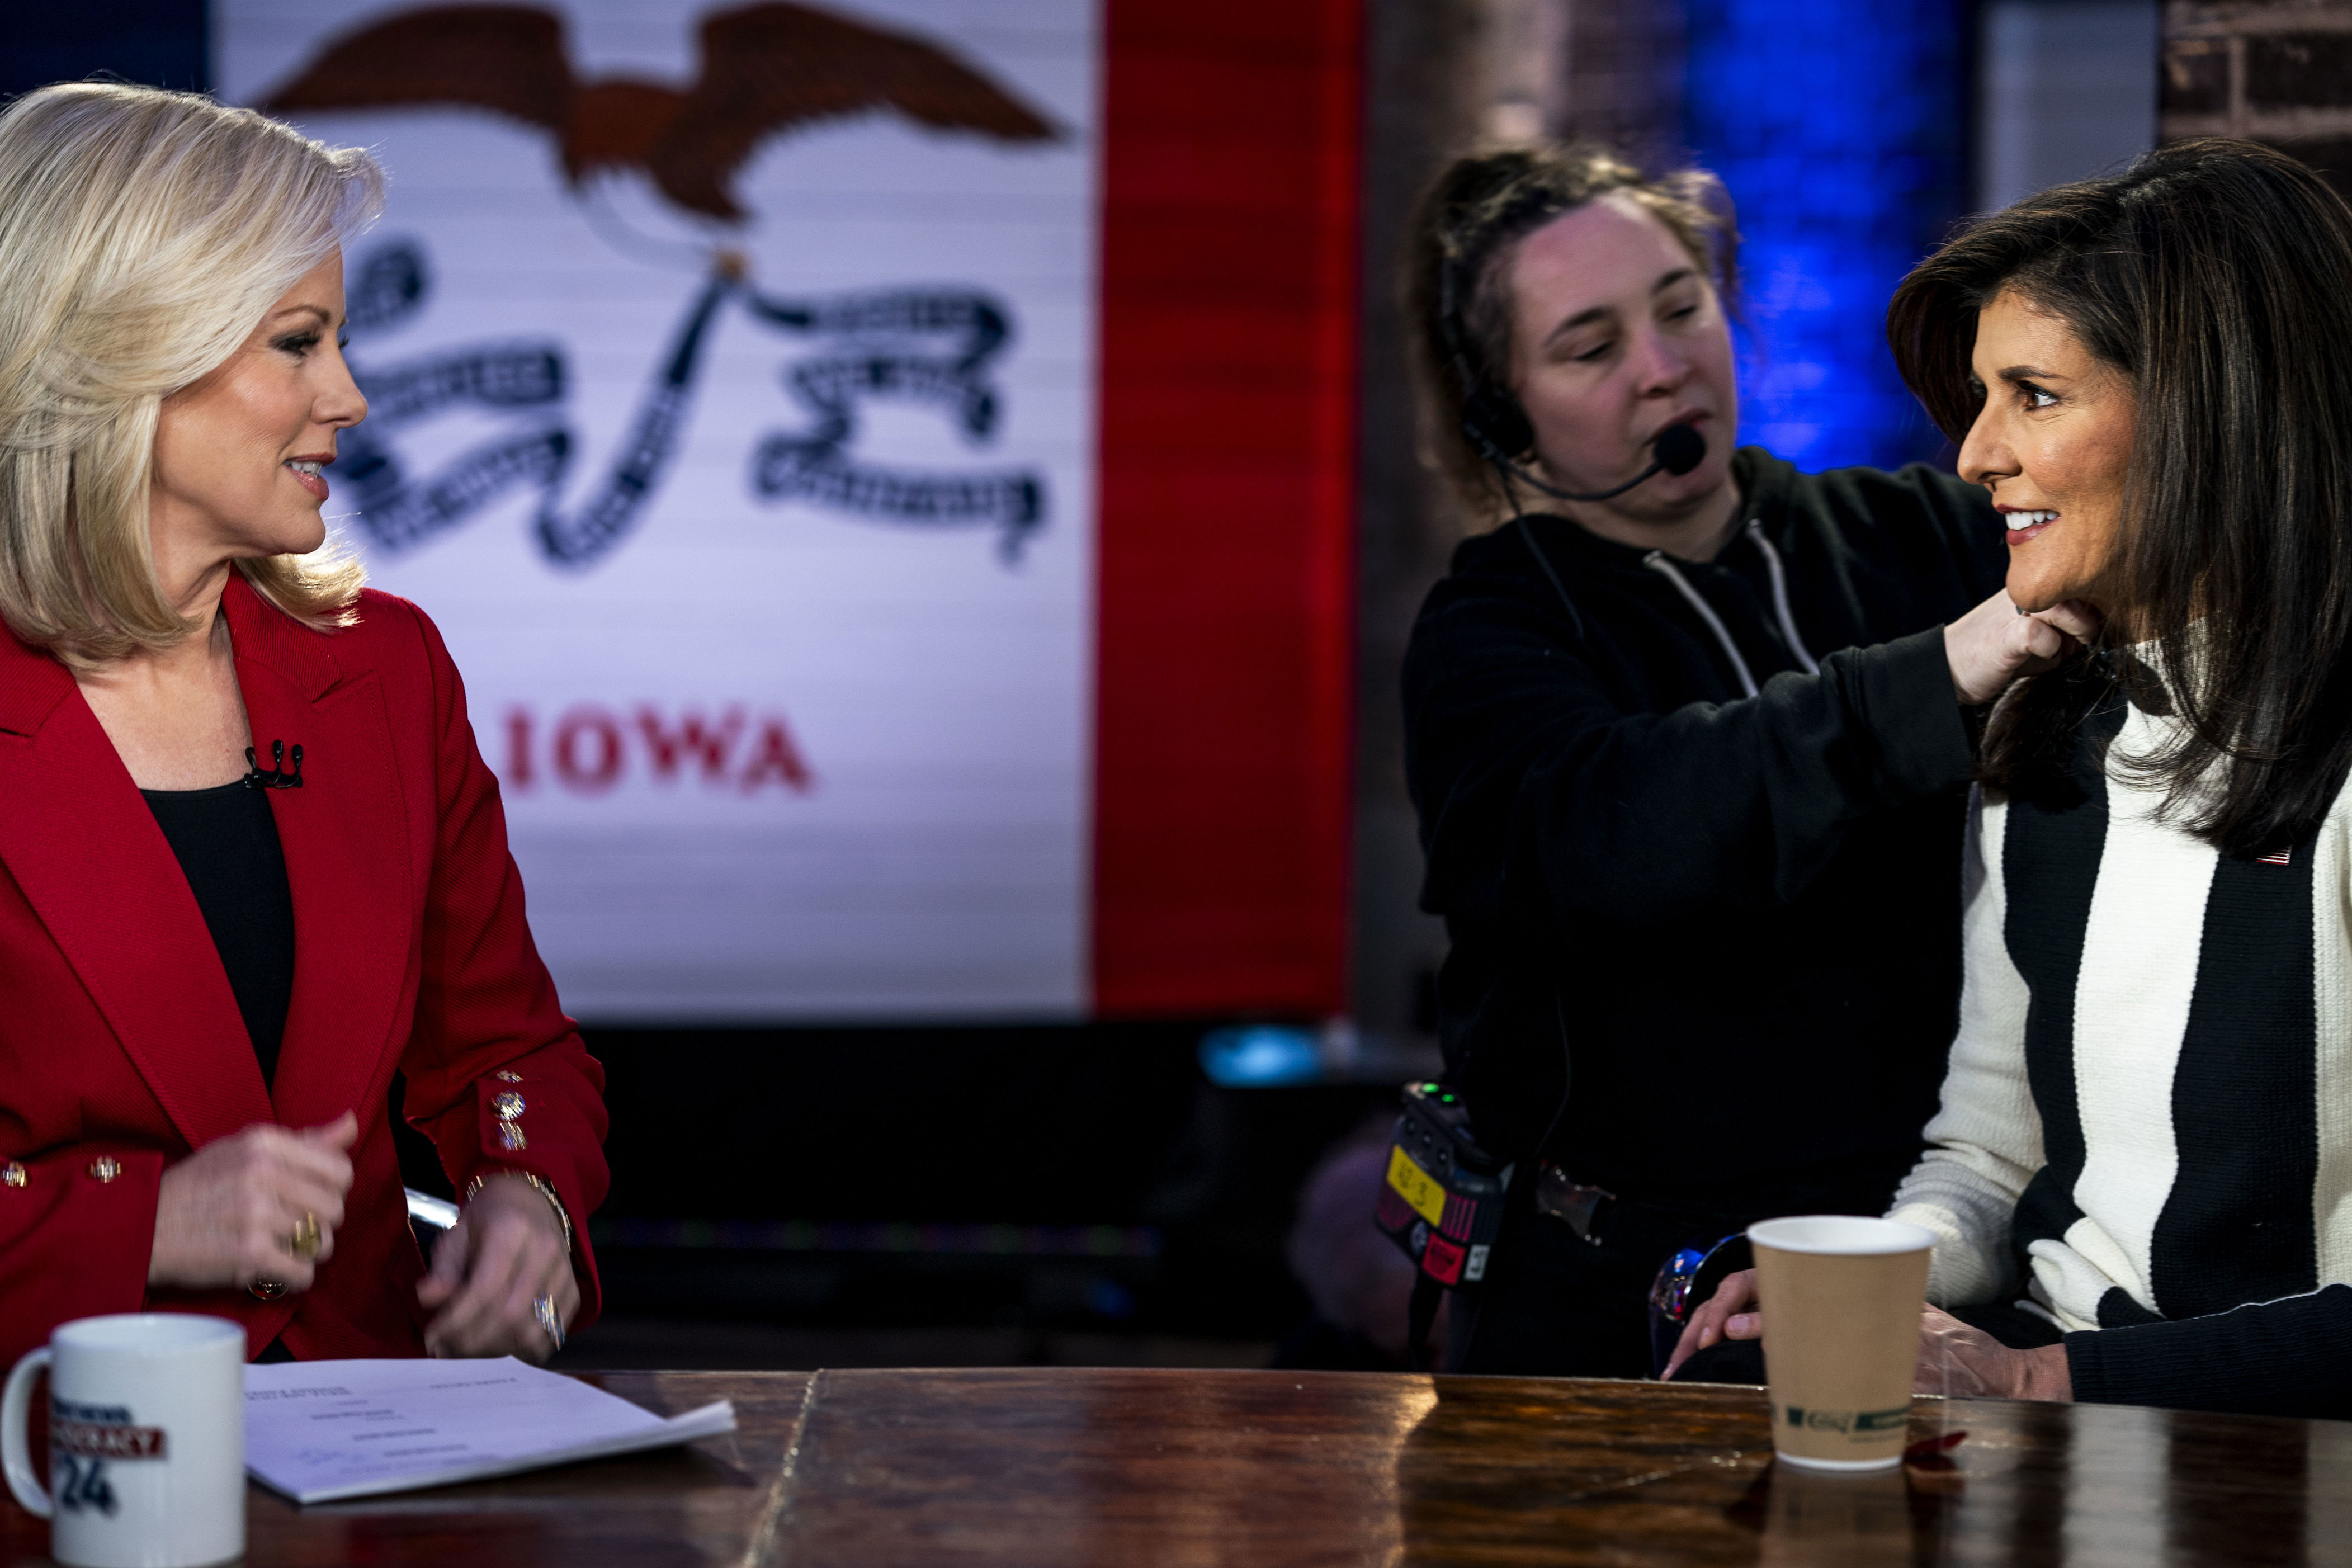 trump-dominated iowa race barrels to contentious finish in frigid weather